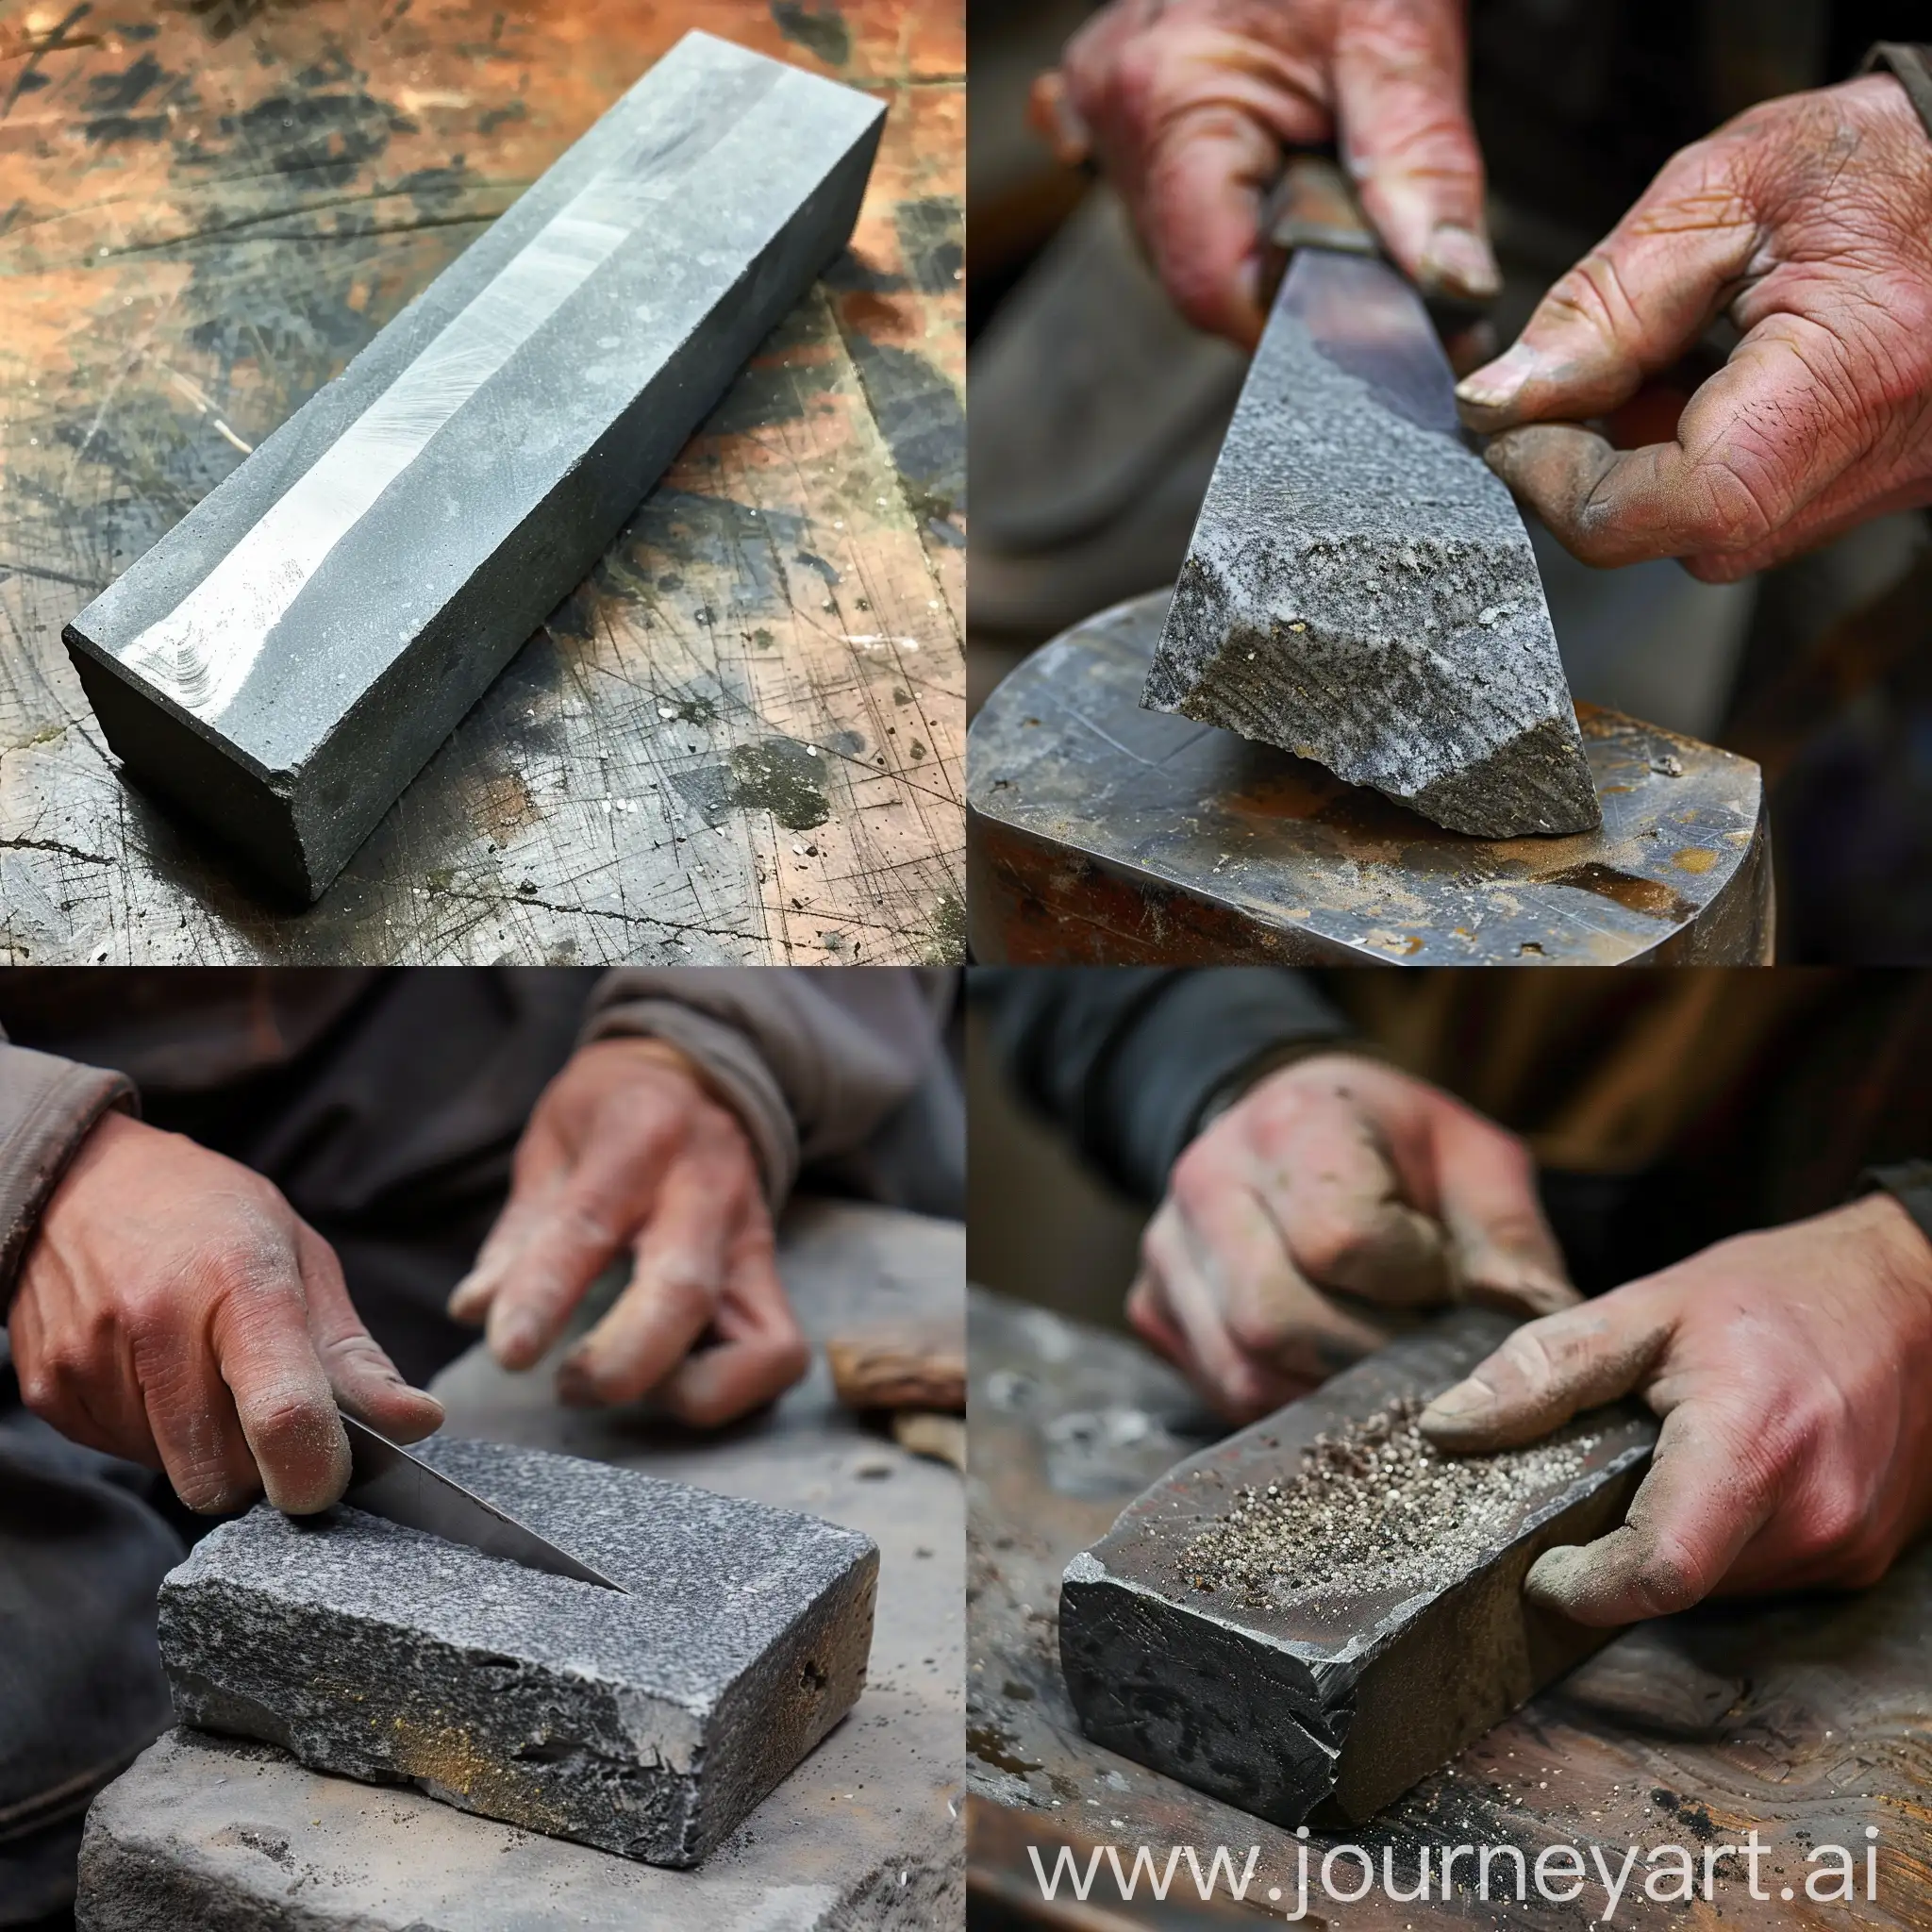 Stone-Sharpening-Ancient-Toolcraft-in-Rustic-Setting